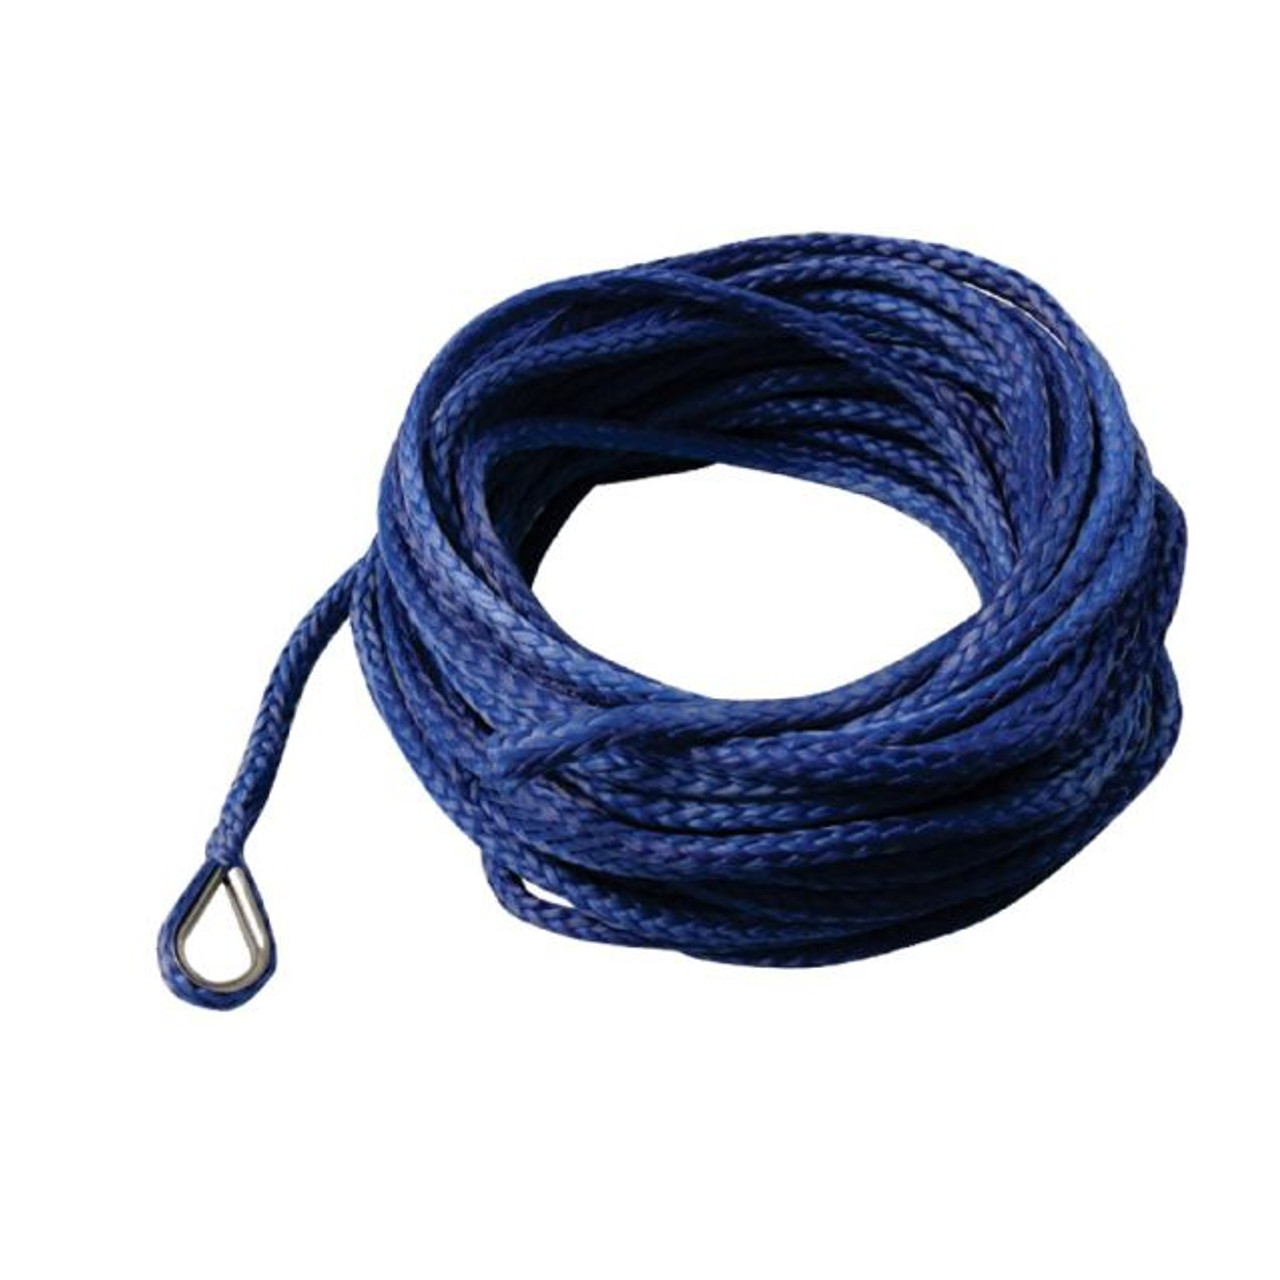 Synthetic 50' ATV Winch Cable (Blue) - KFI ATV Winch, Mounts and Accessories